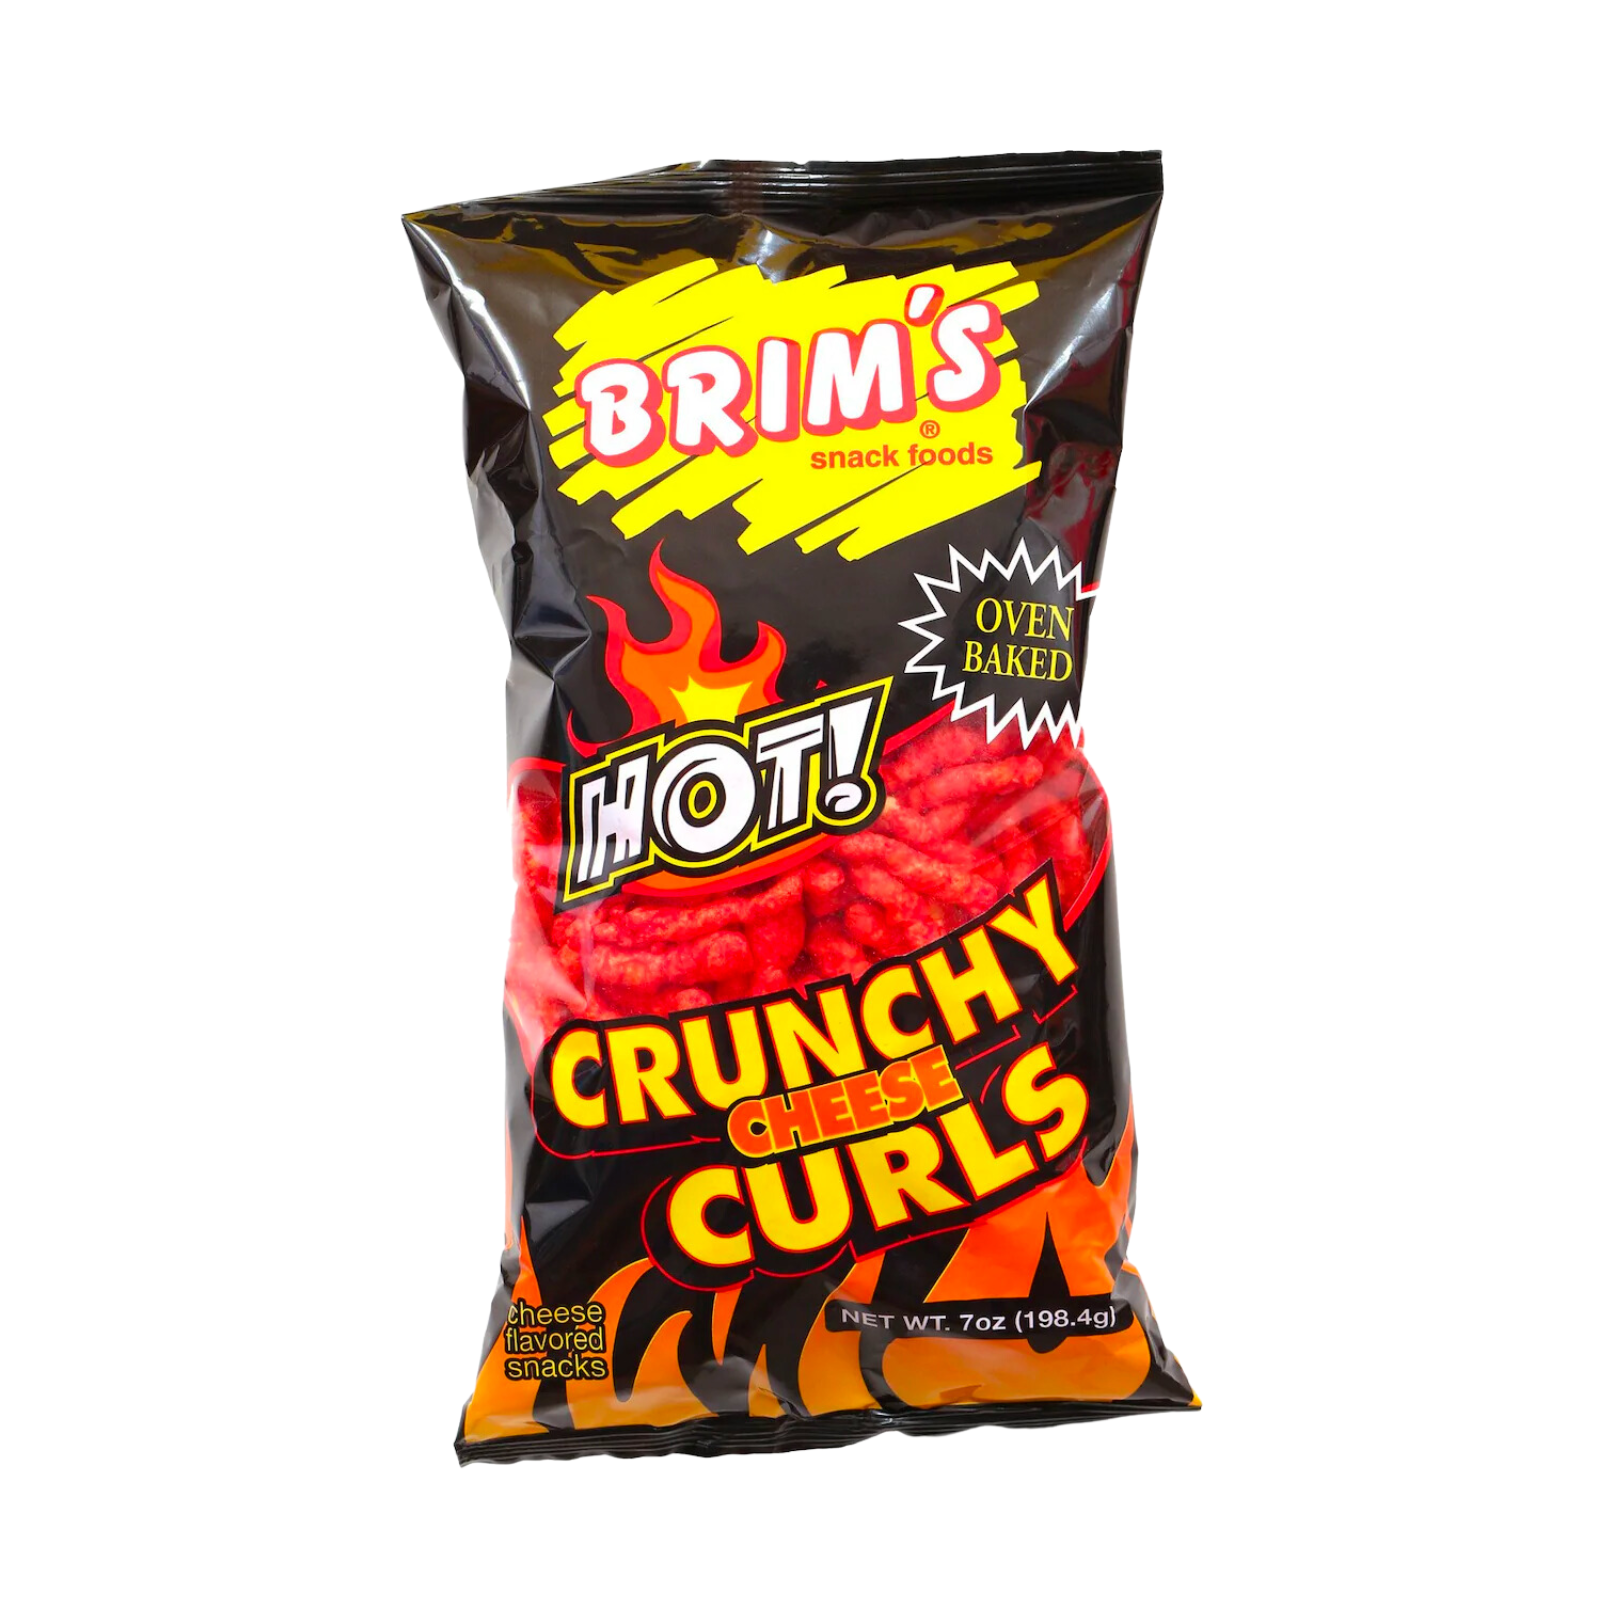 Brim's Crunchy Hot Cheese Curls (7 oz., 6-pack) - image 3 of 6